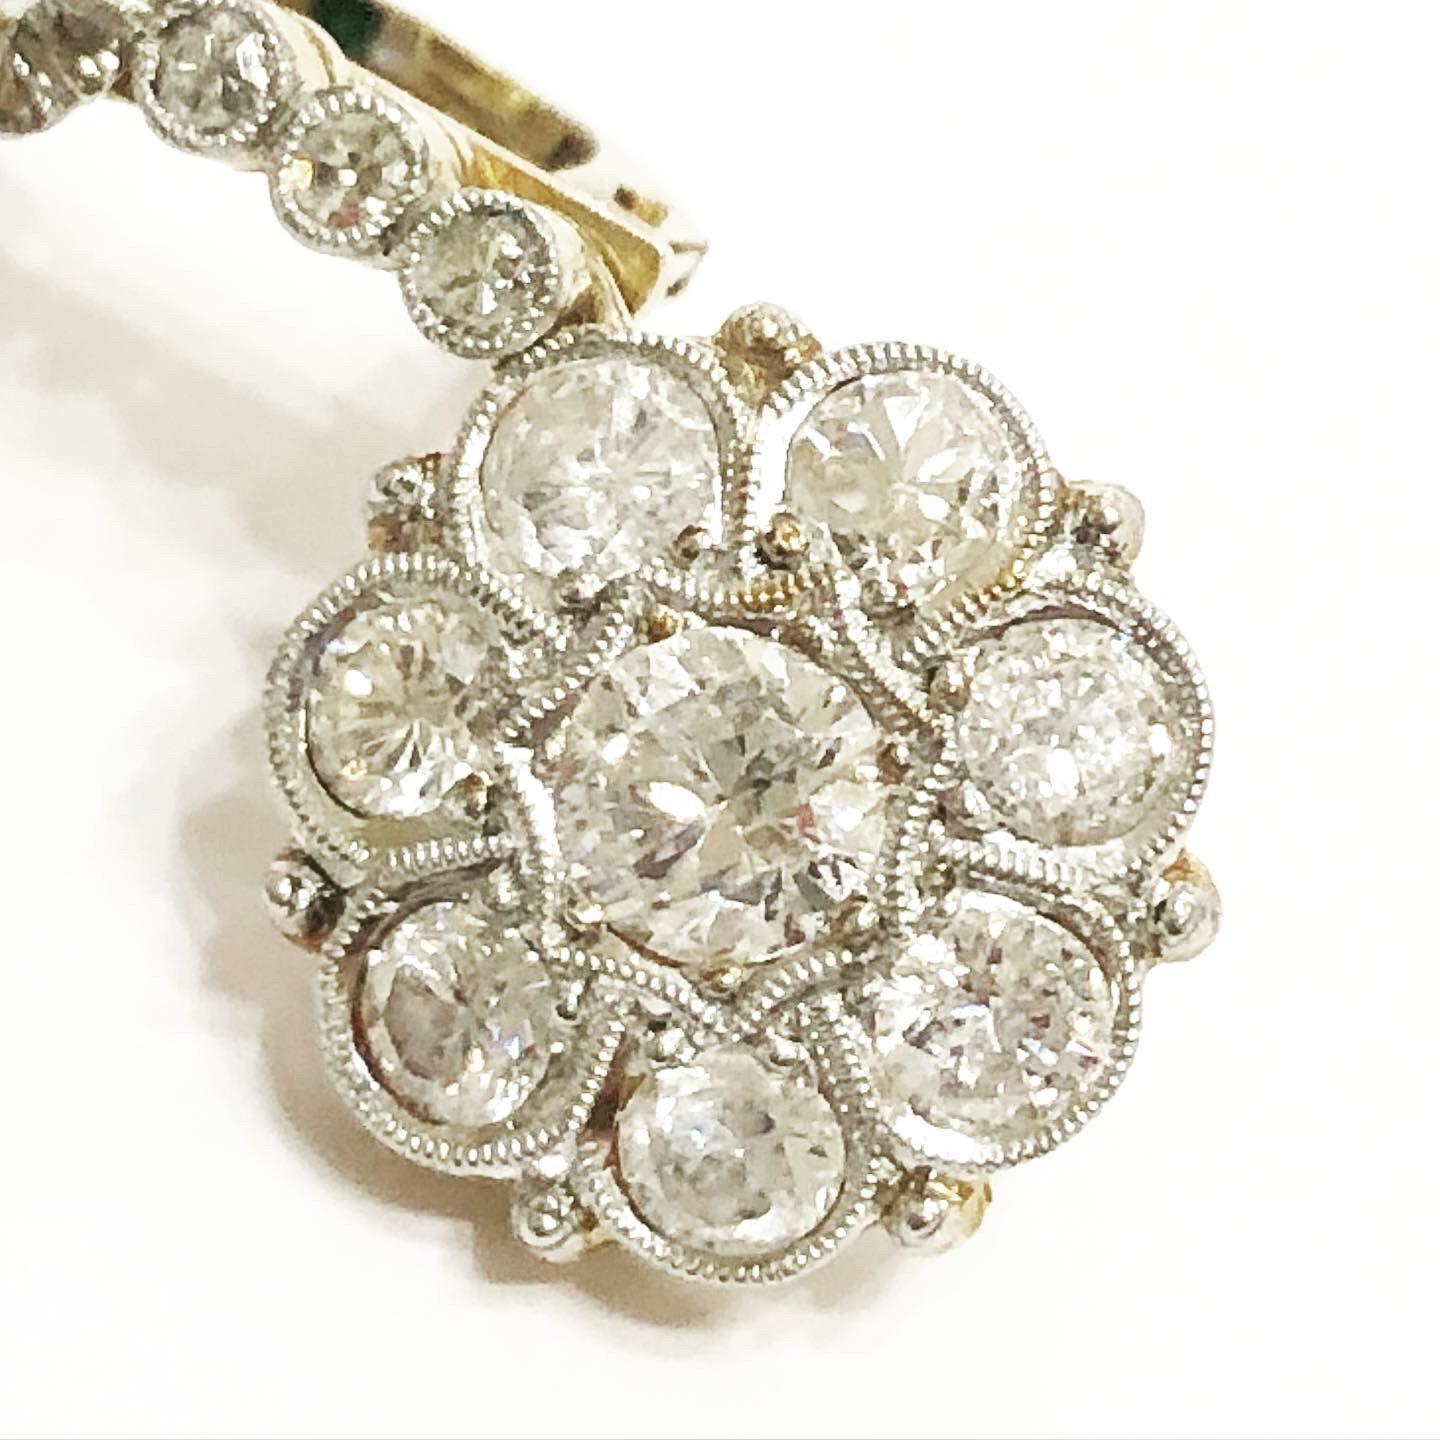 Elegant diamond platinum 18 karat yellow gold round dangle drop earrings circa 1920.
Brilliant cut and Old European diamond cut.
Leverback system.
Condition: Good.
Total approximate weight of the diamonds: 2 carat.
Total weight of the jewel: 5.5